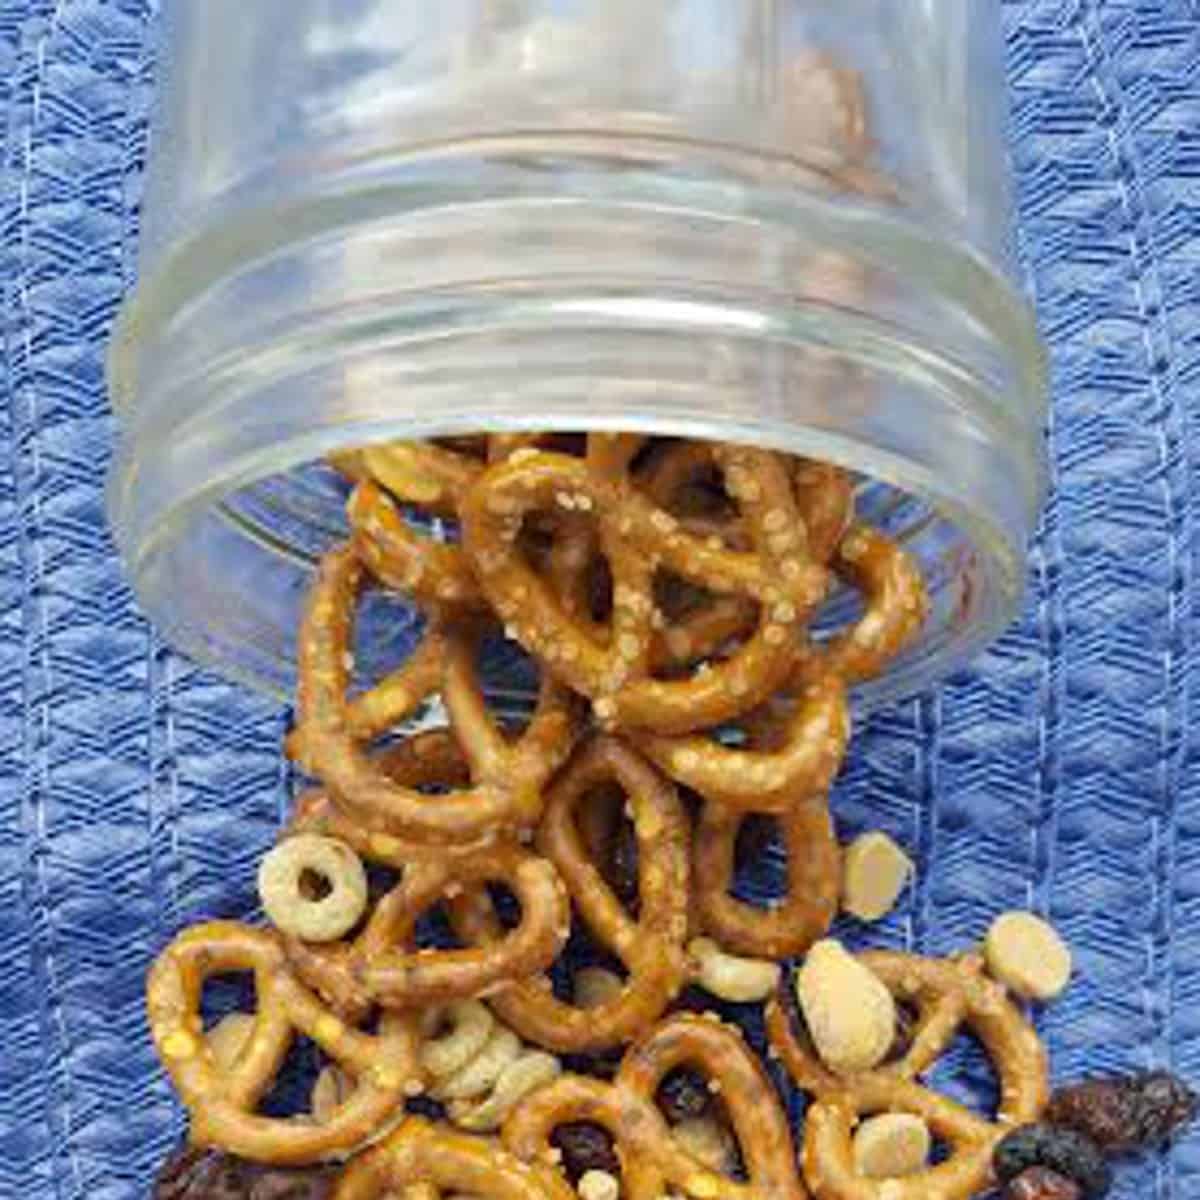 A close up photo of trail mix with chocolate spilling out a mason jar. The jar contains pretzels, cheerios, nuts, dried fruit and chocolate chips.